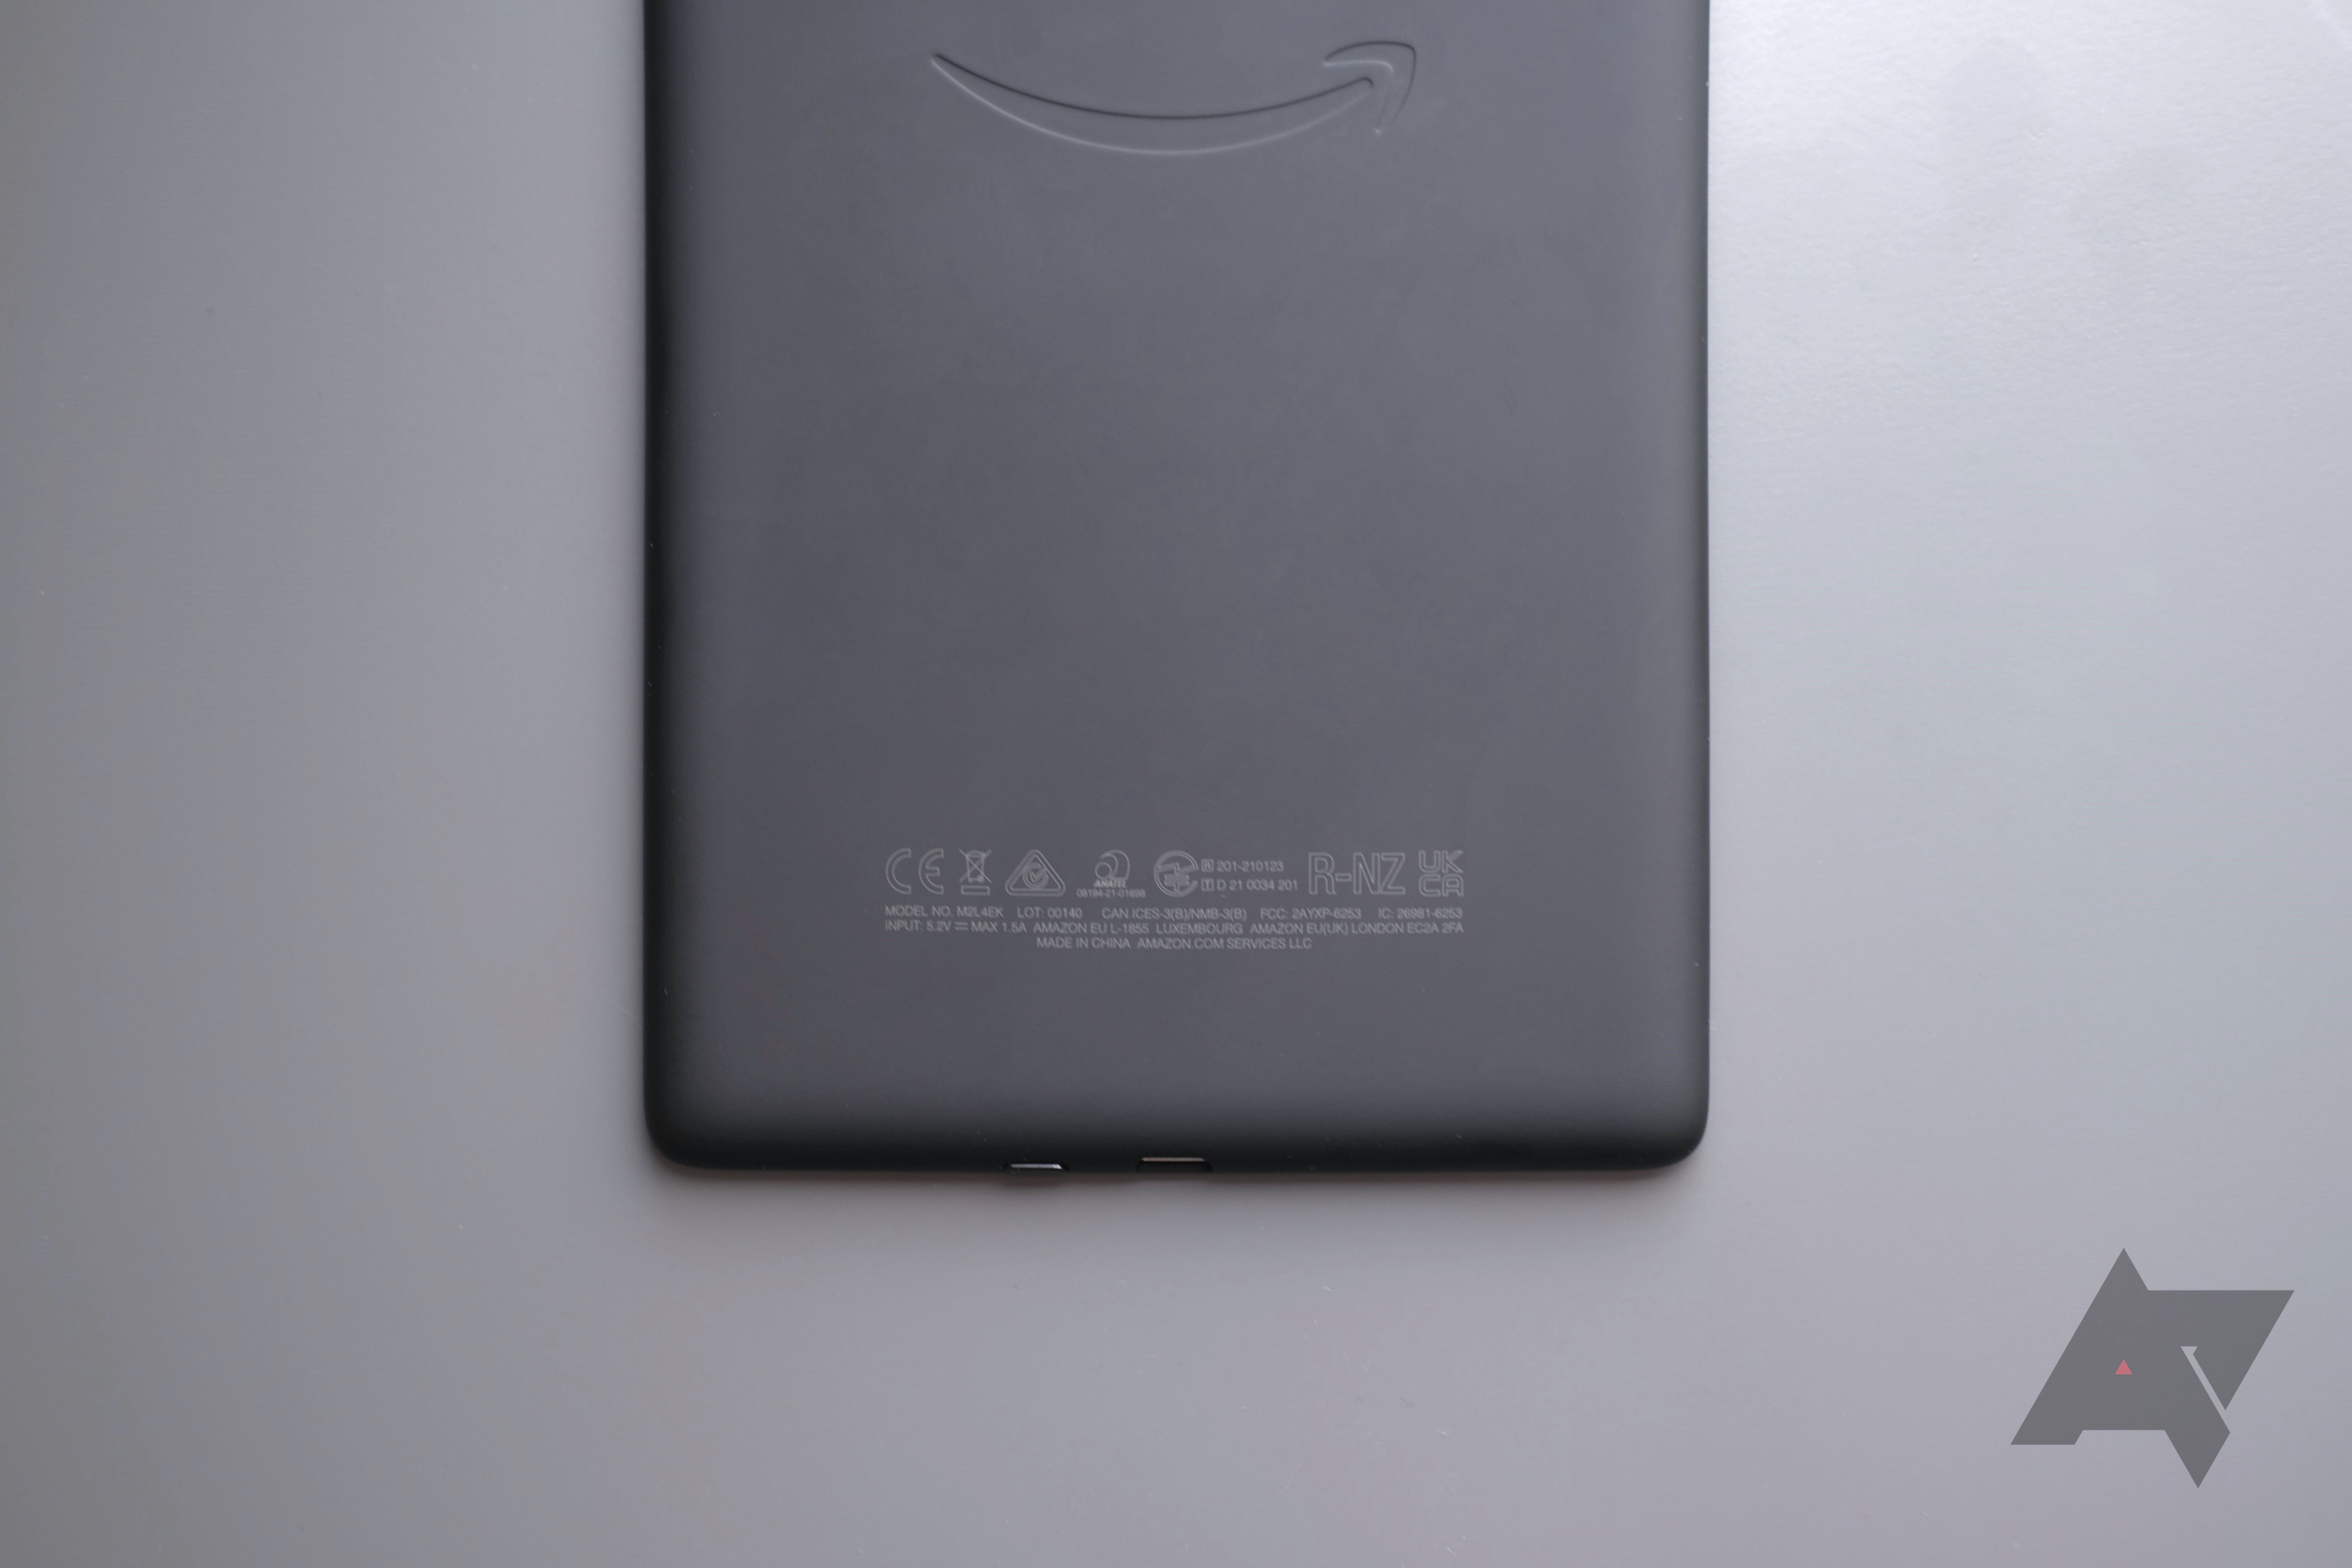 Kindle Paperwhite Signature Edition review specs pic2